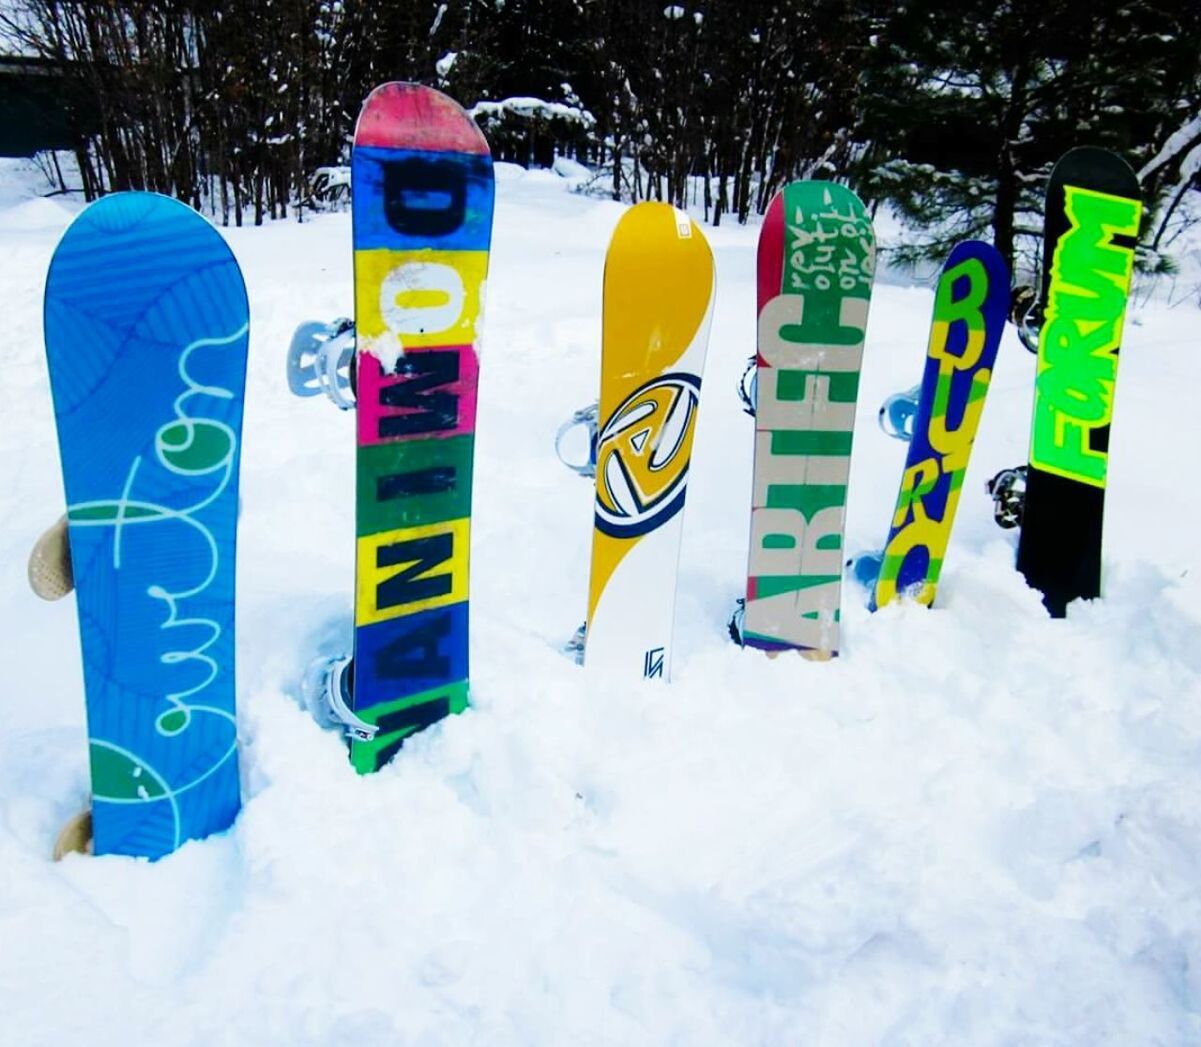 multi colored, blue, creativity, colorful, yellow, art, art and craft, winter, graffiti, day, text, snow, western script, cold temperature, white color, outdoors, guidance, sport, toy, variation